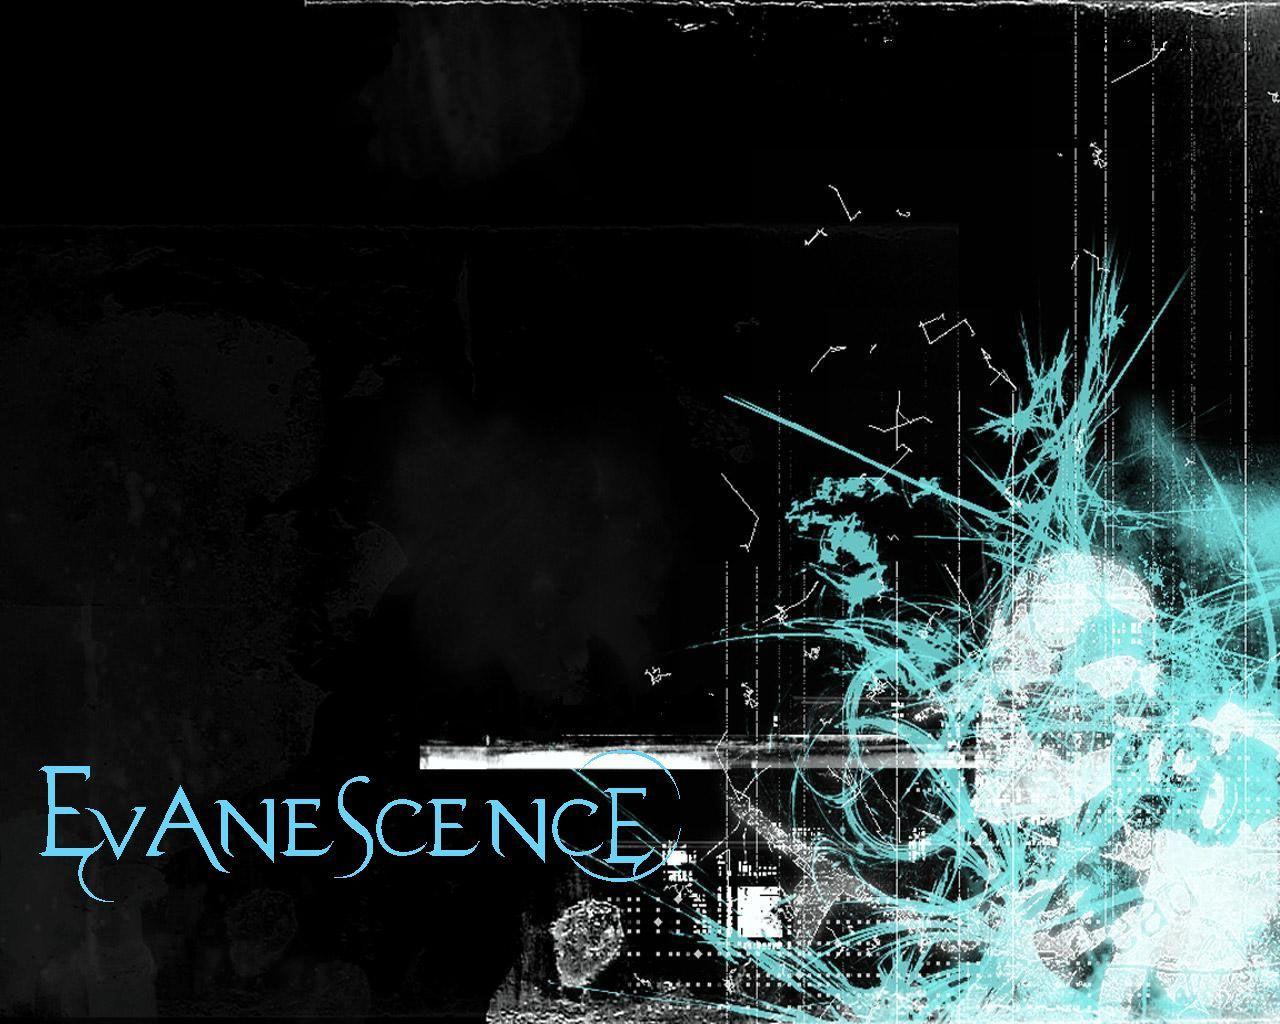 Evanescence Wallpapers and Pictures